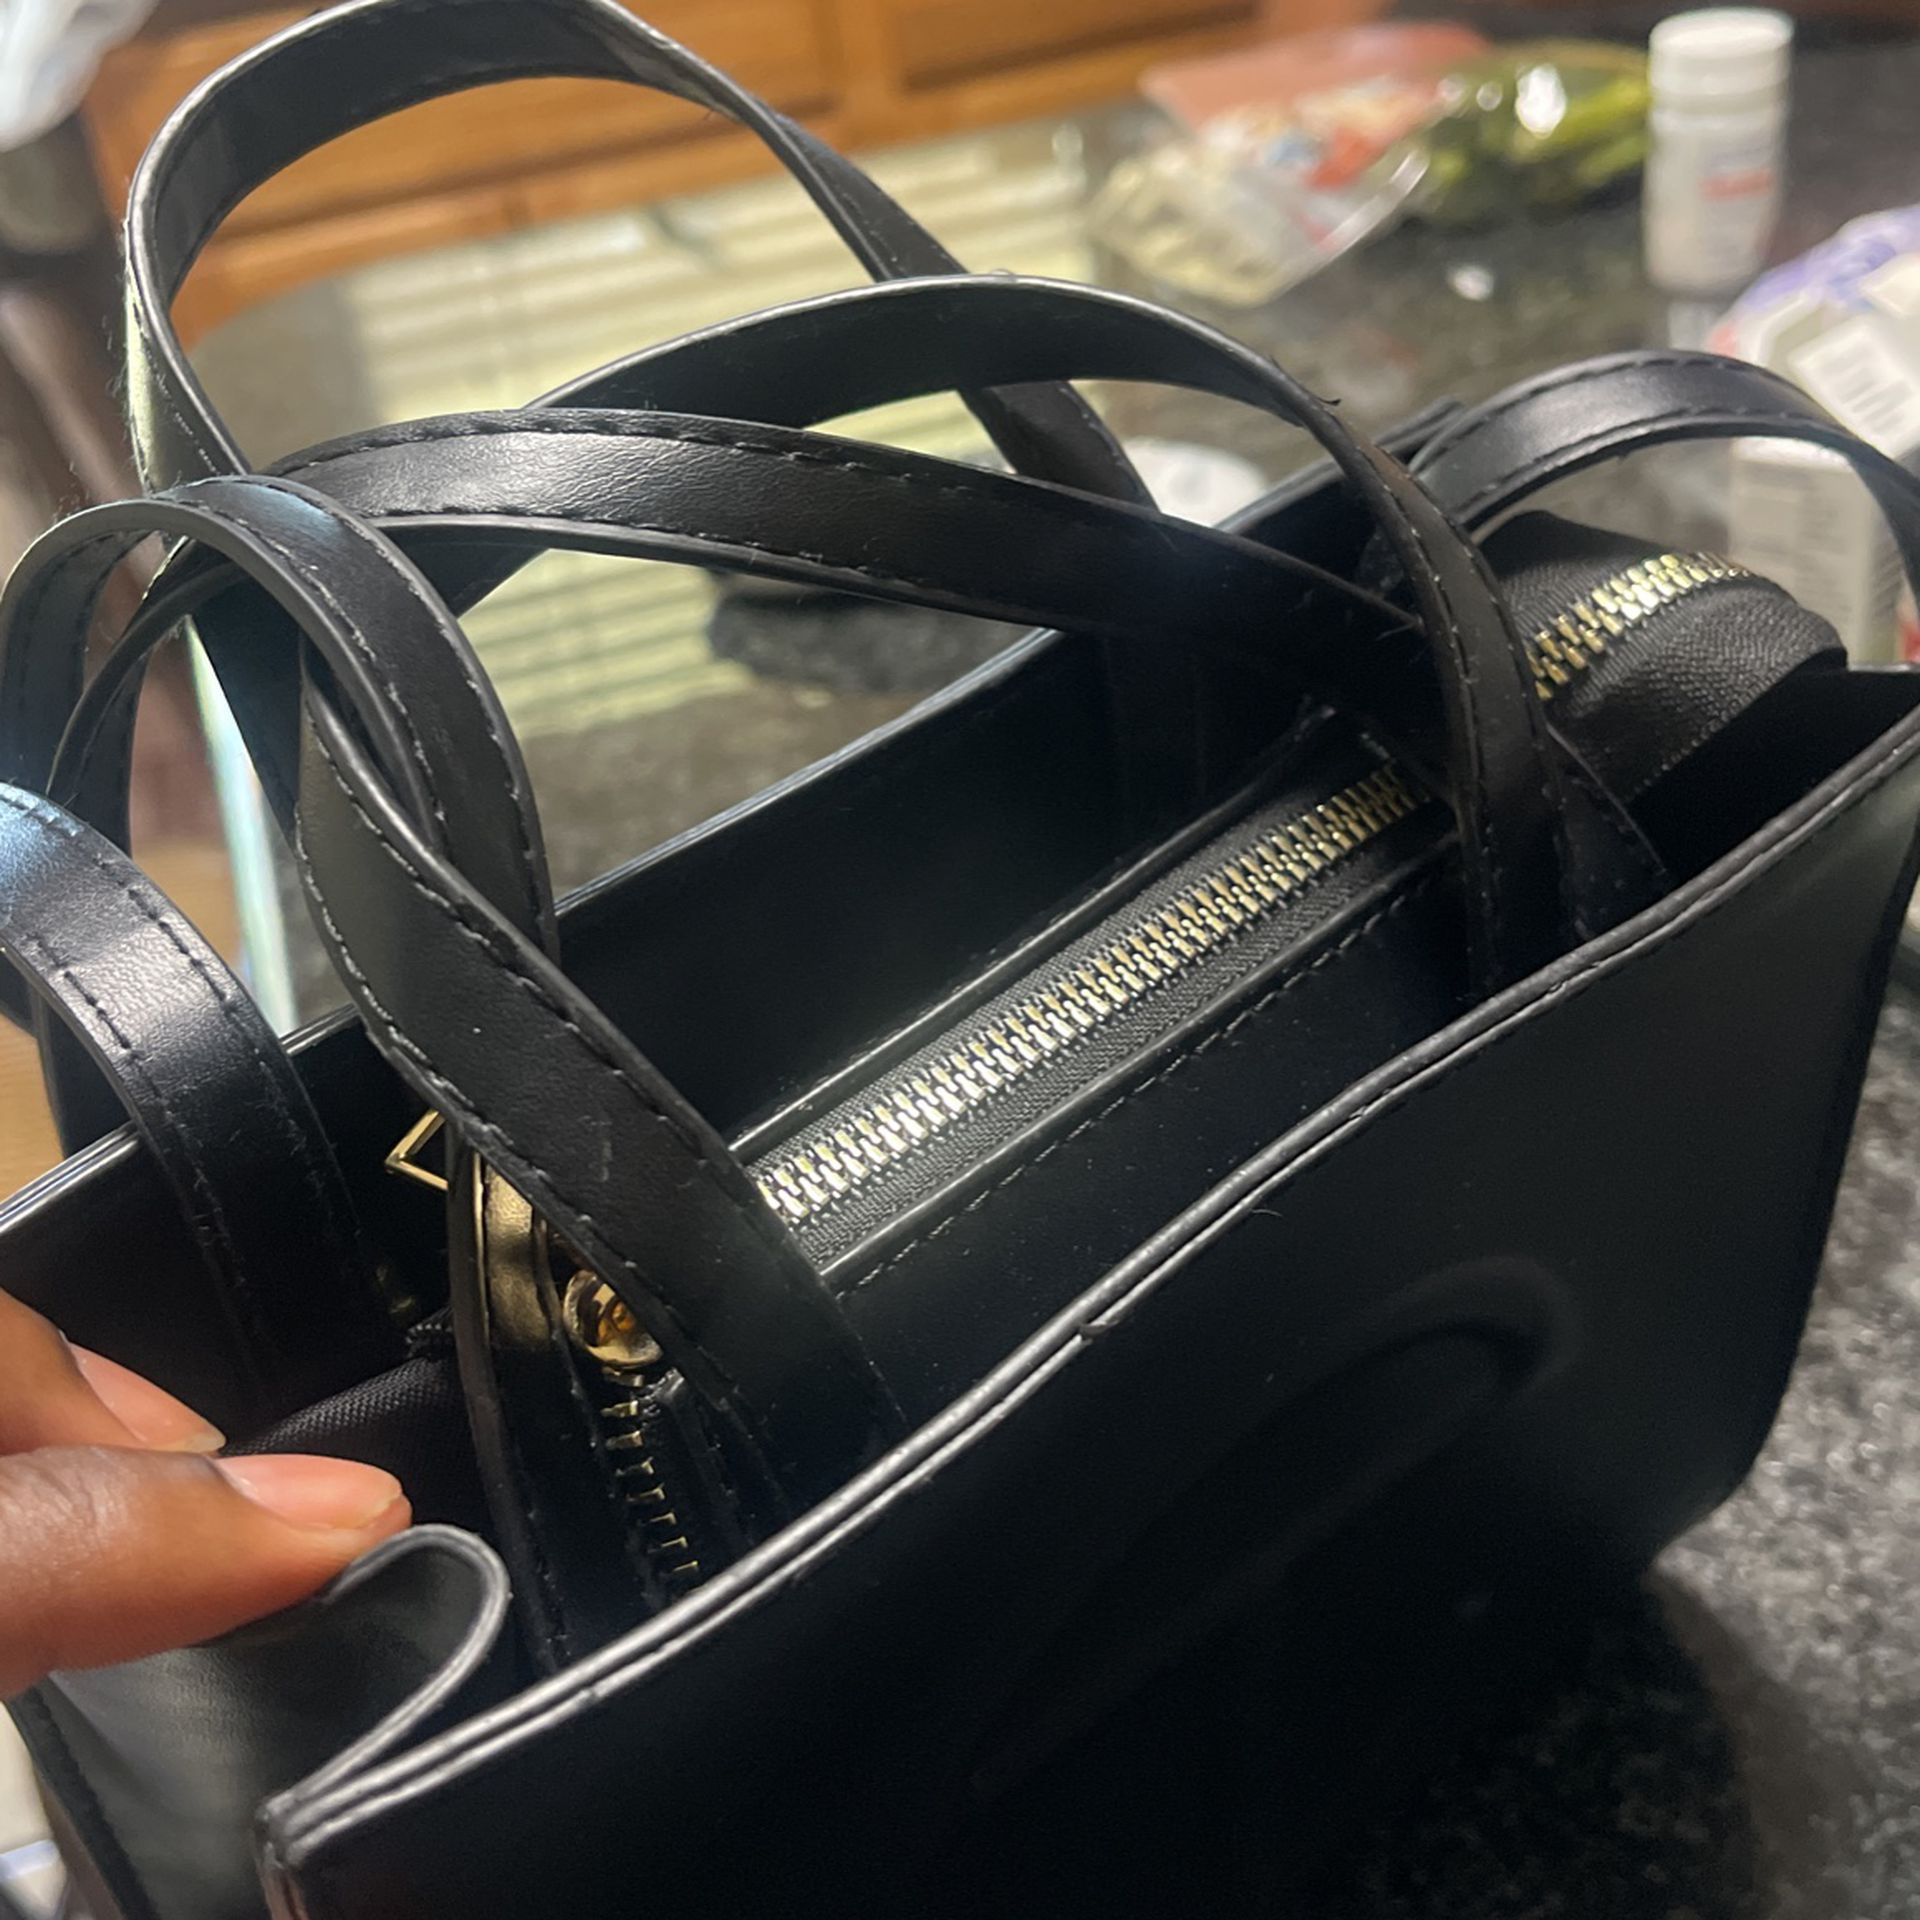 Burberry bags for sale in New Orleans, Louisiana